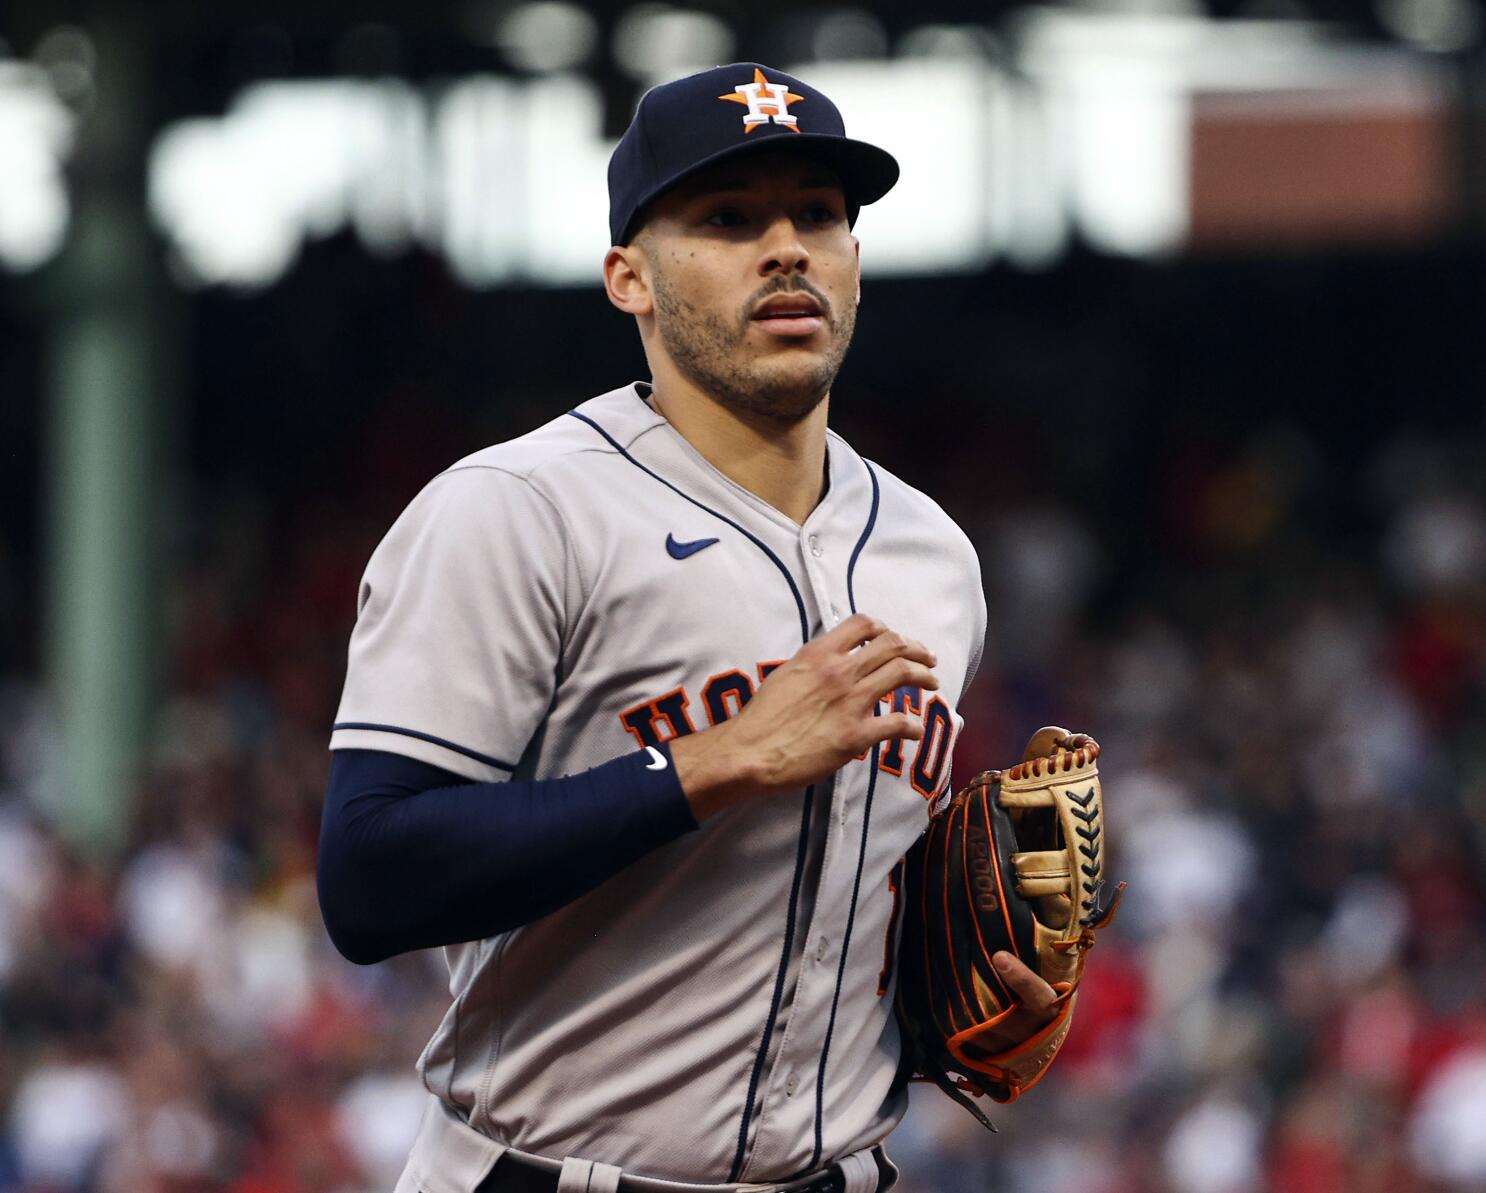 Mets sign left-handed reliever amid Carlos Correa situation